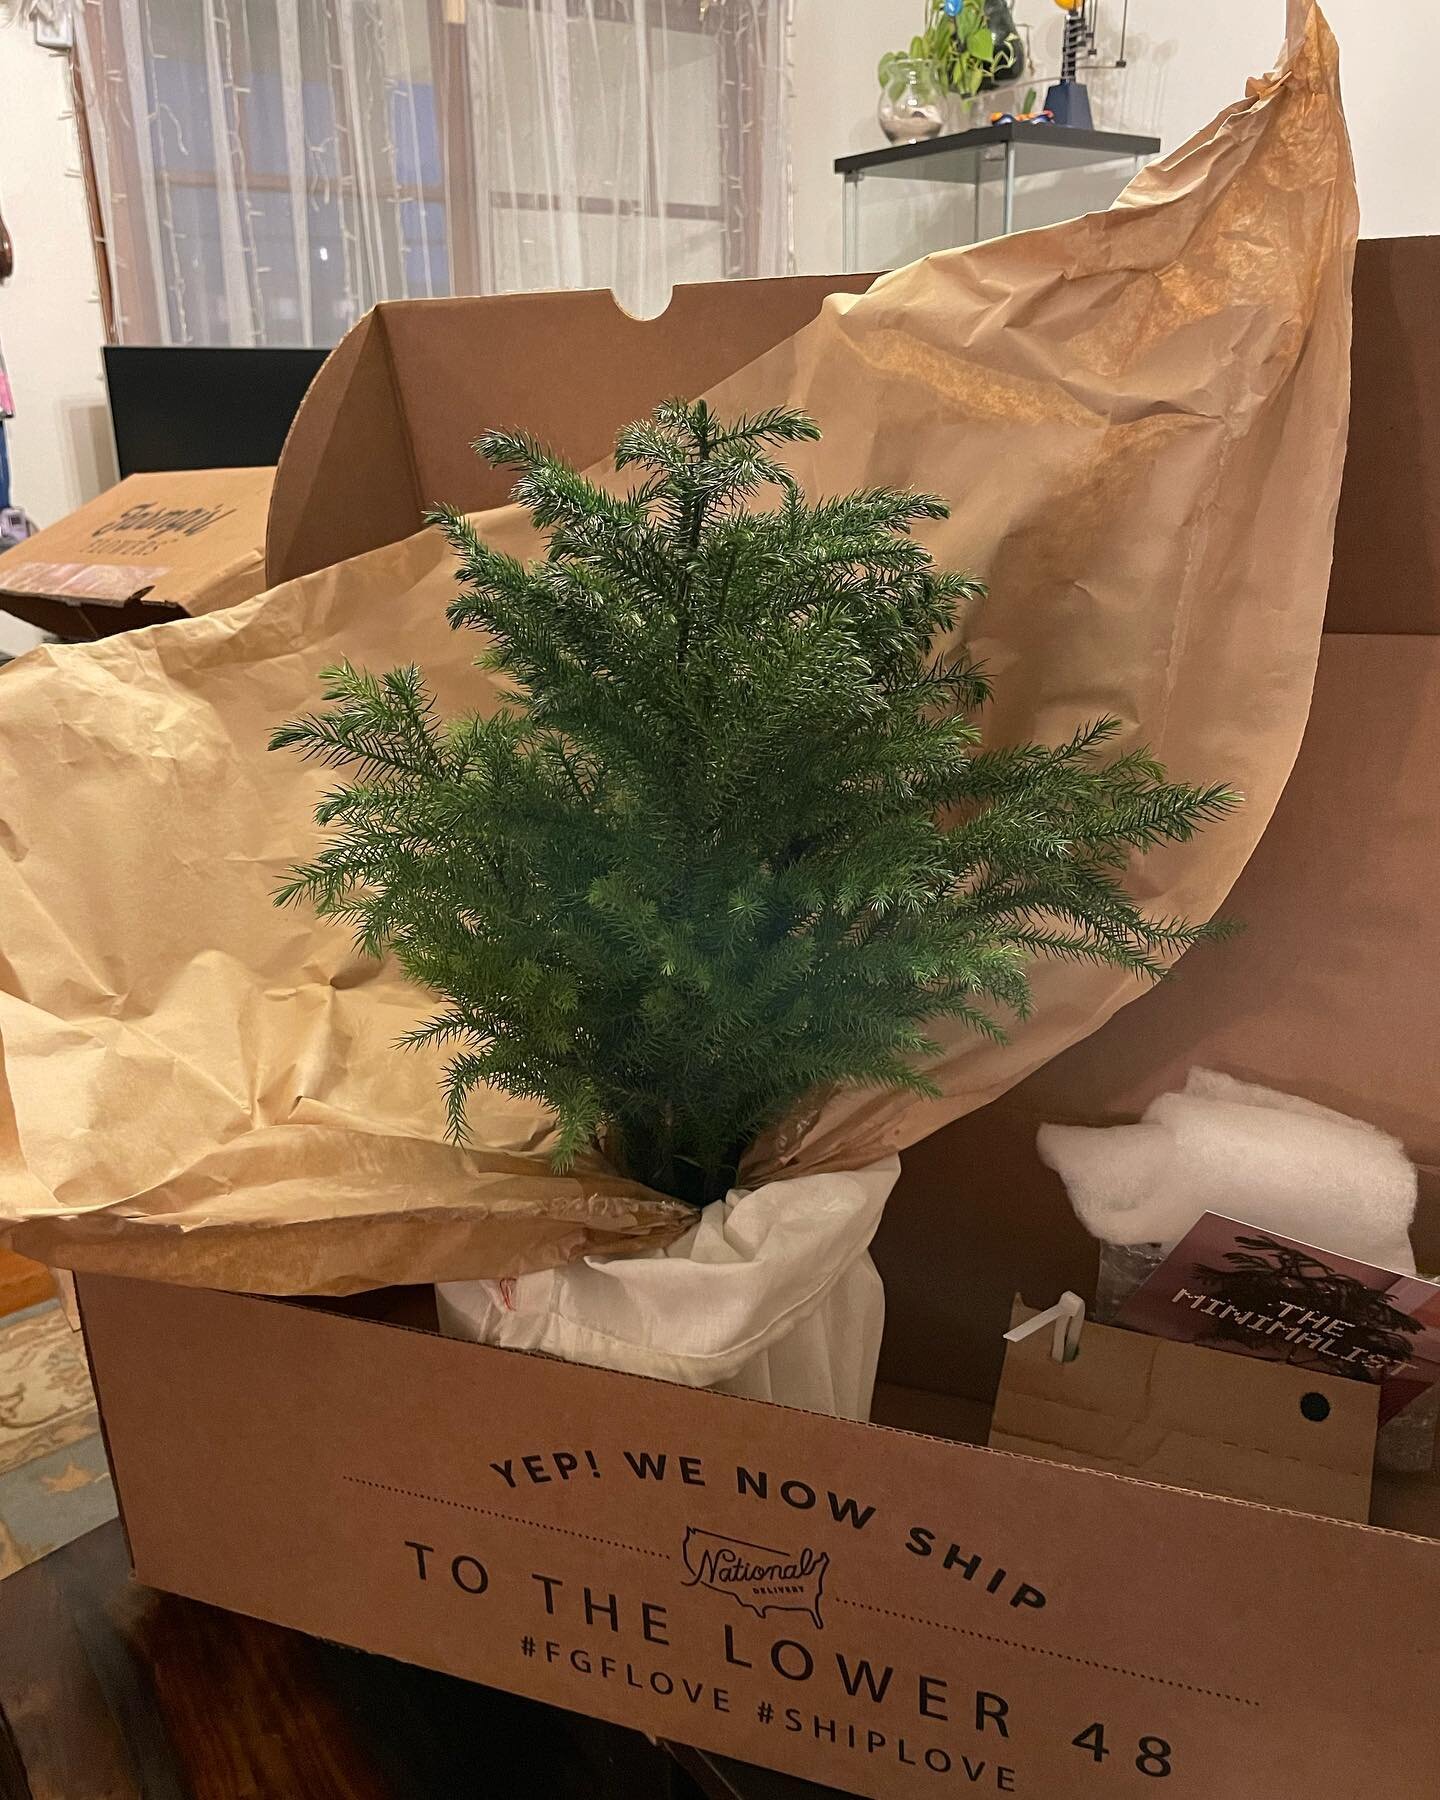 @farmgirlflowers I have no idea why I received this gift, but I am literally sobbing with gratitude.
🎄
We are moving this month. By all good grace, we just bought a beautiful home &mdash; our first.
🎄
While this is such a blessing in our lives, we 